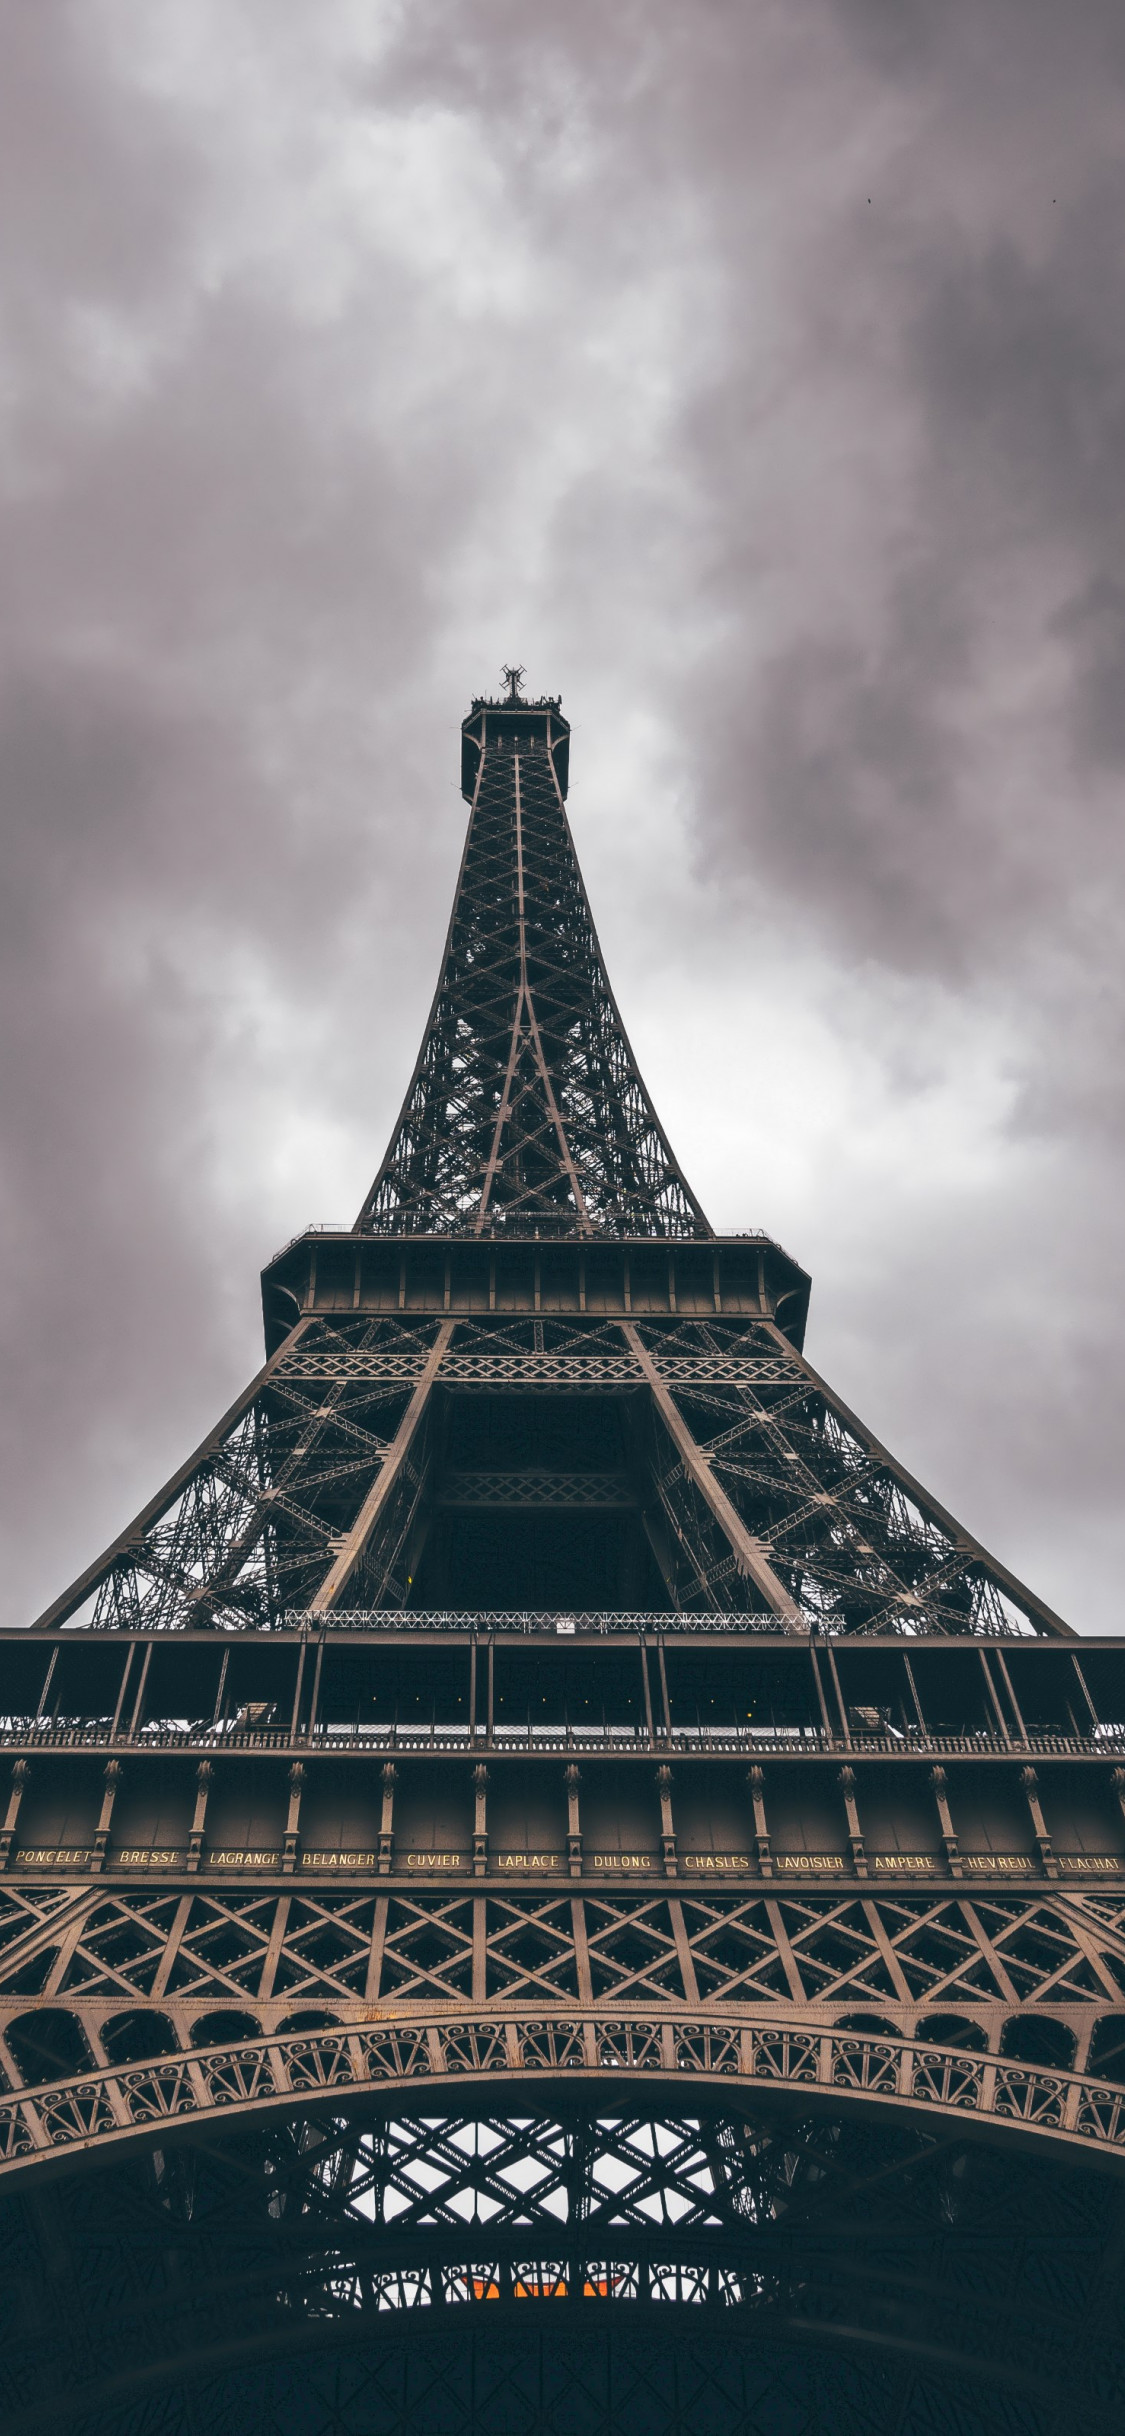 Eiffel Tower in a cloudy day wallpaper 1125x2436